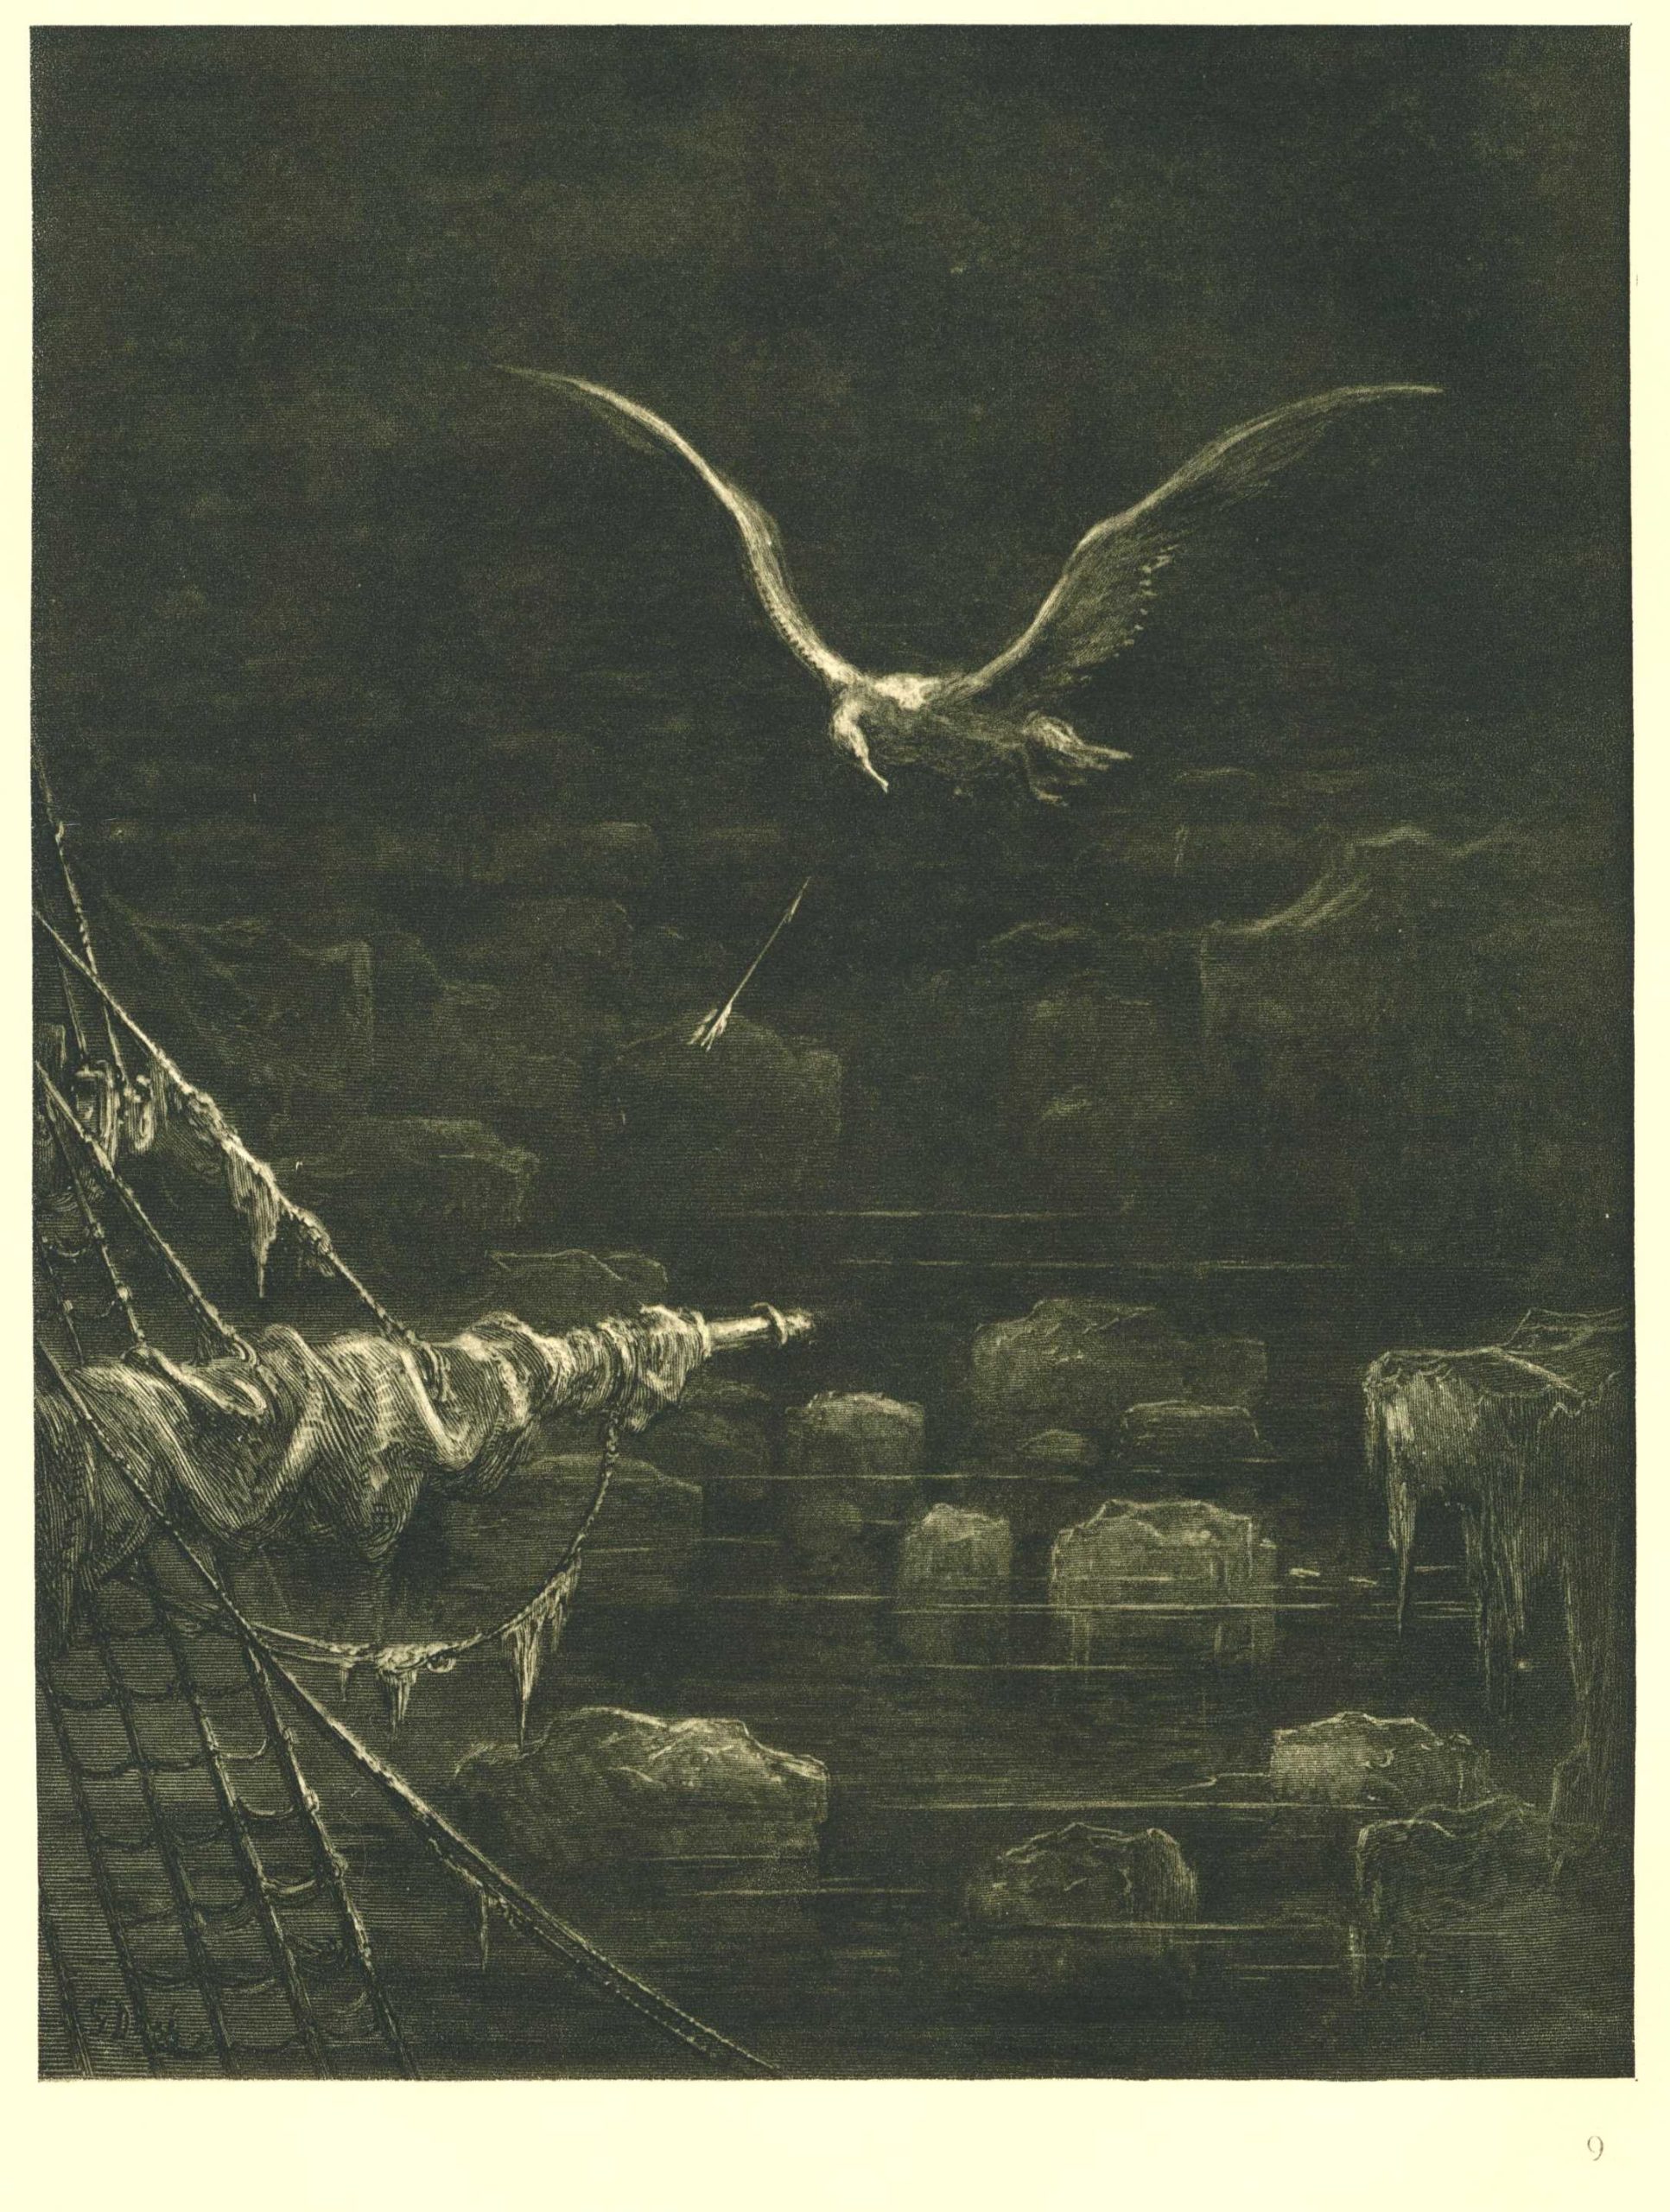 A bow in midair aims at an albatross flying above a ship at night